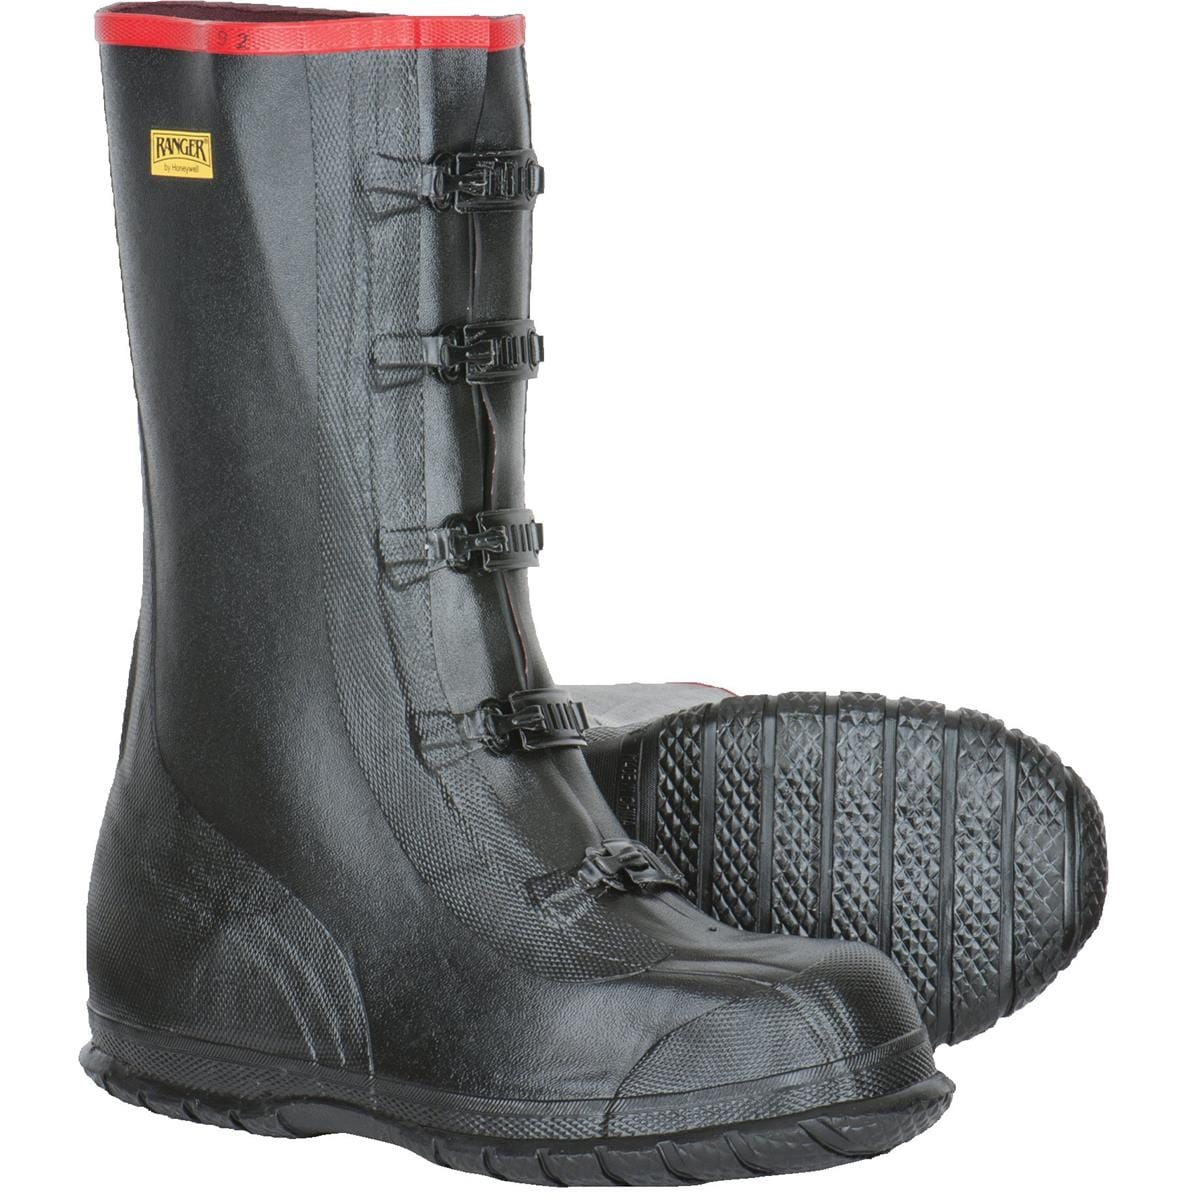 servus boots 16 insulated rubber